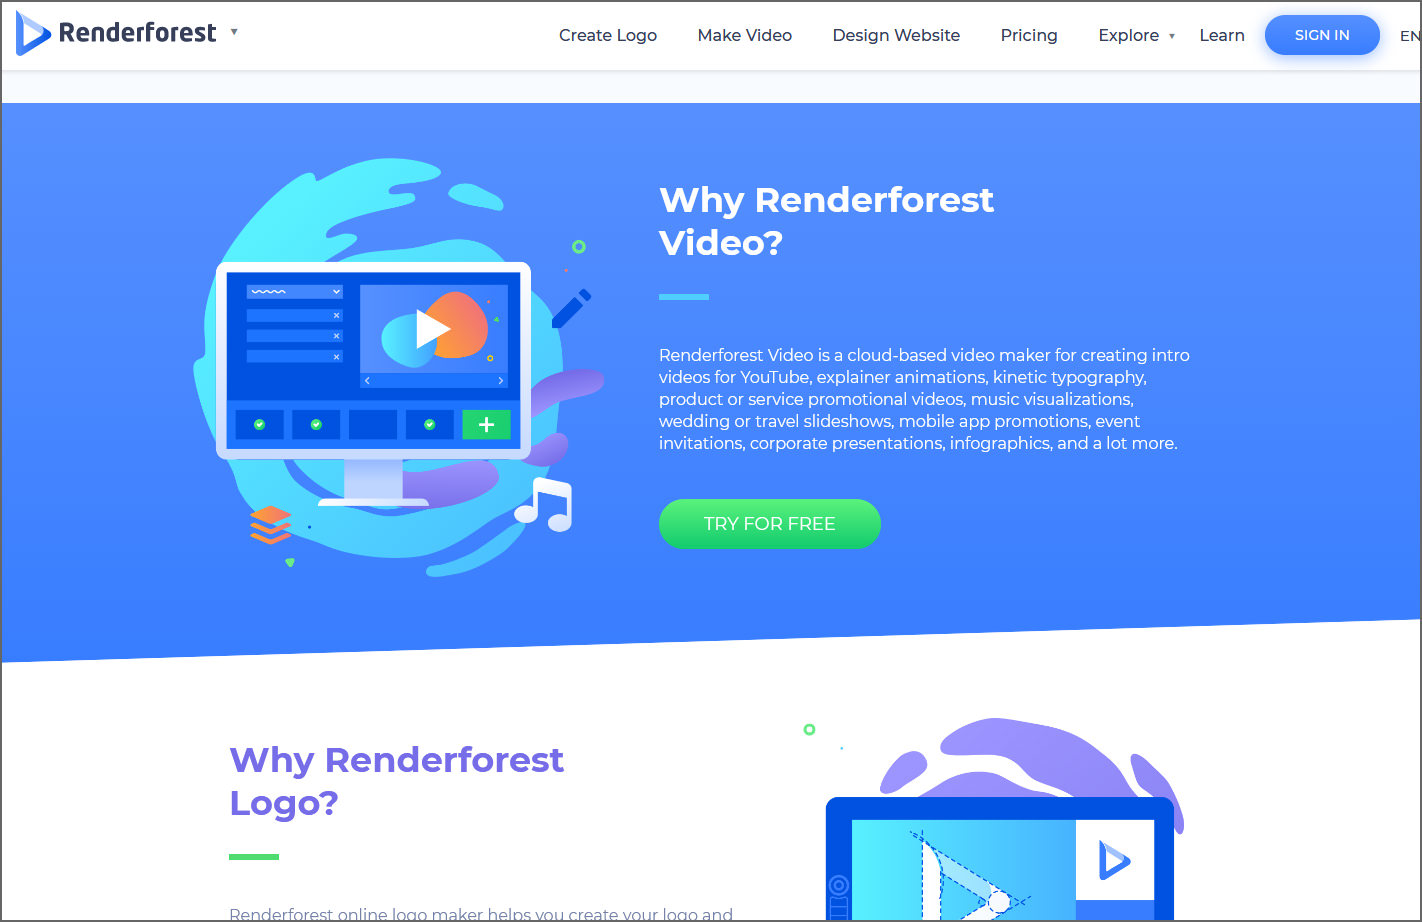 Renderforest Review